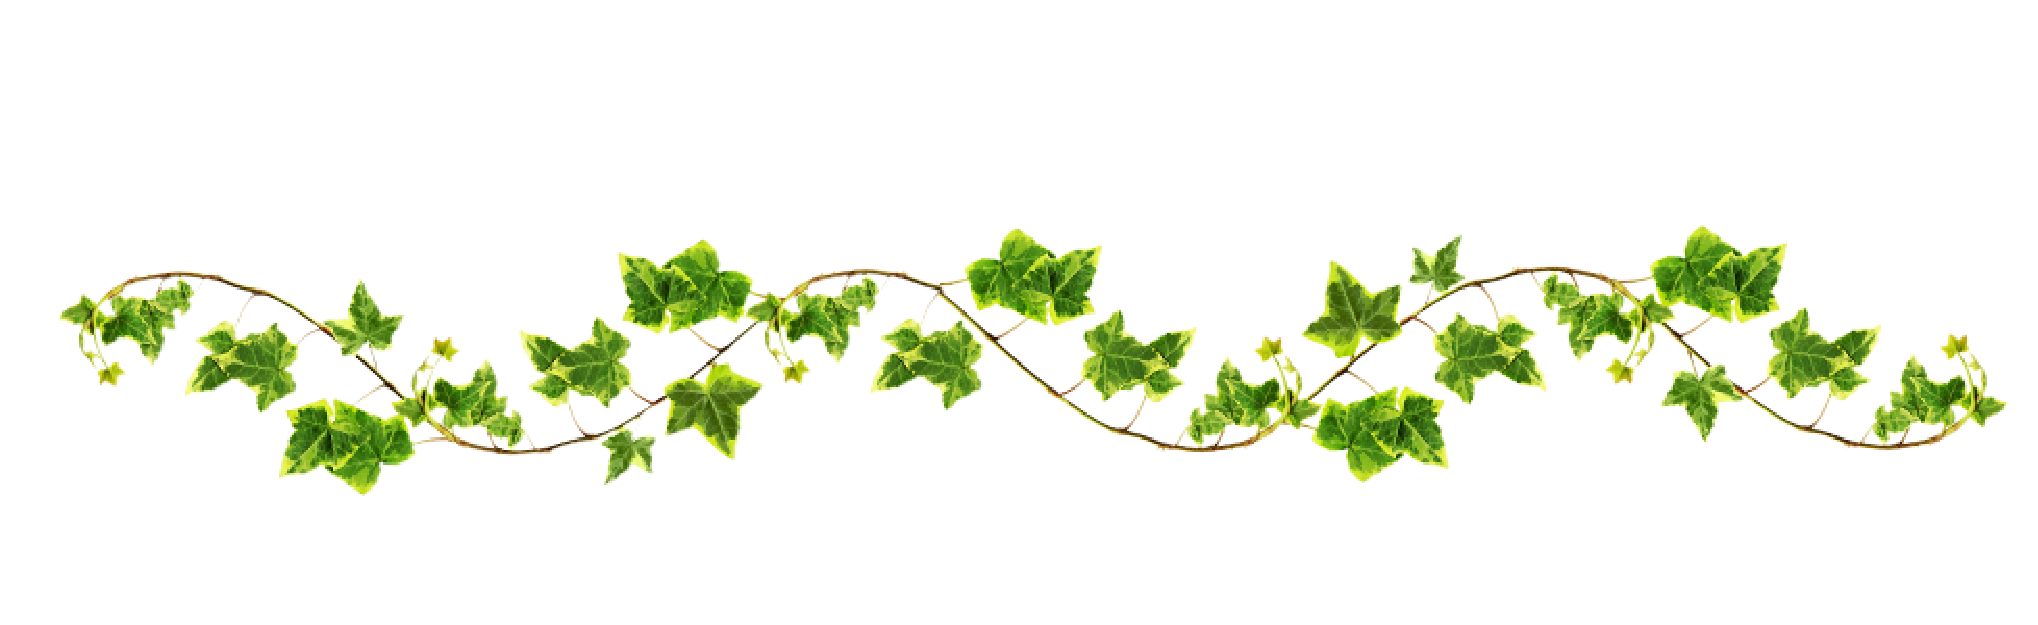 Wavy Vine Png #43649 - Free Icons and PNG Backgrounds